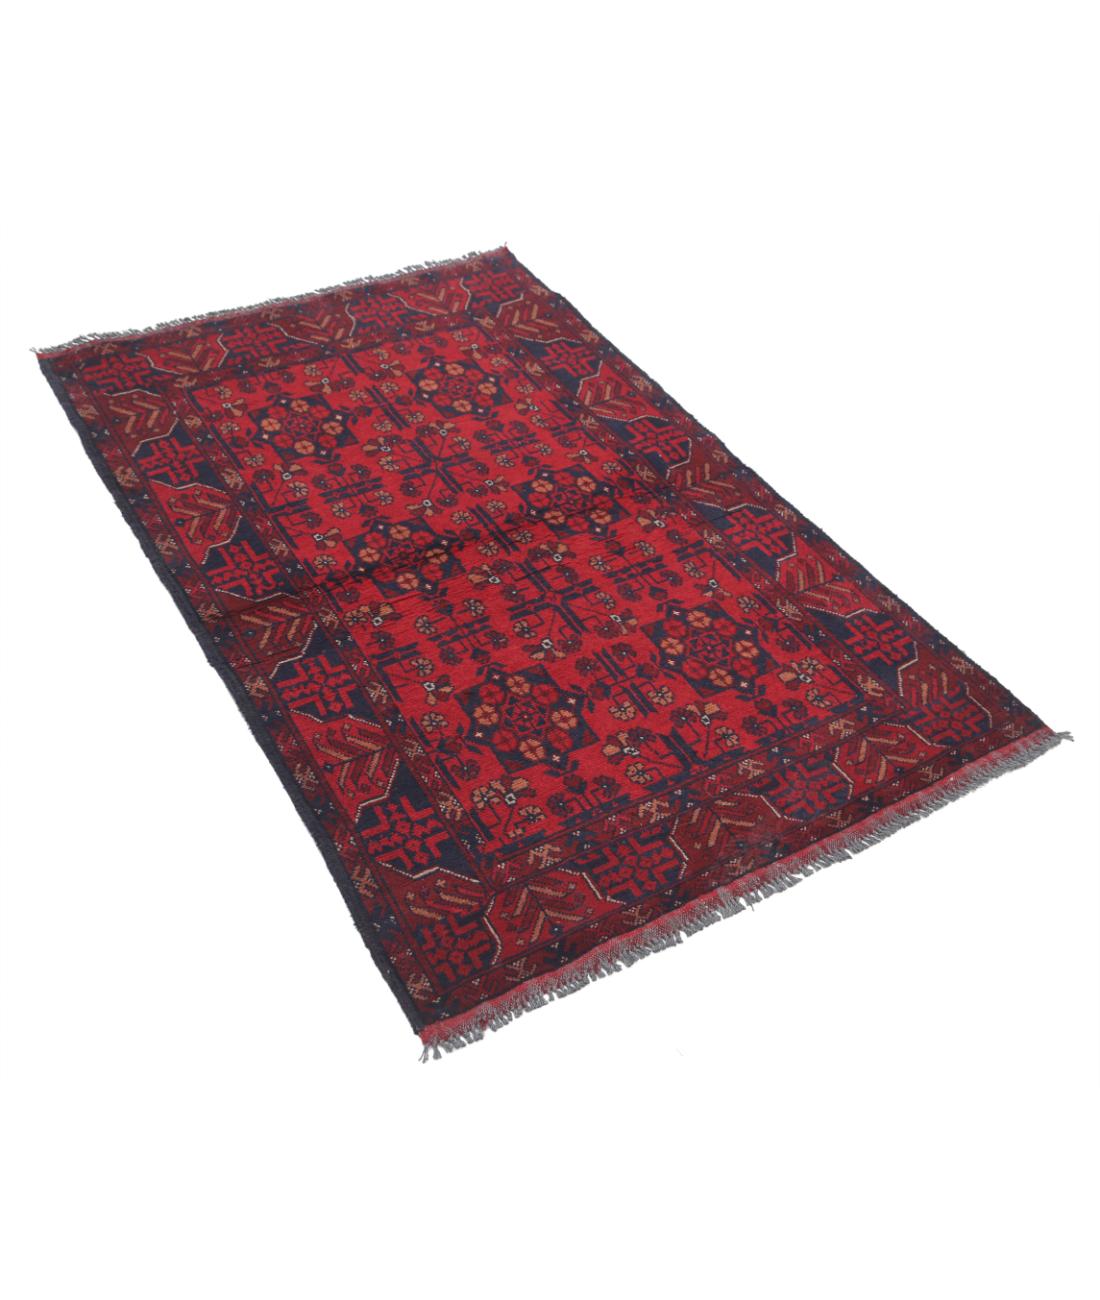 Afghan 3' 3" X 4' 11" Hand-Knotted Wool Rug 3' 3" X 4' 11" (99 X 150) / Red / Blue